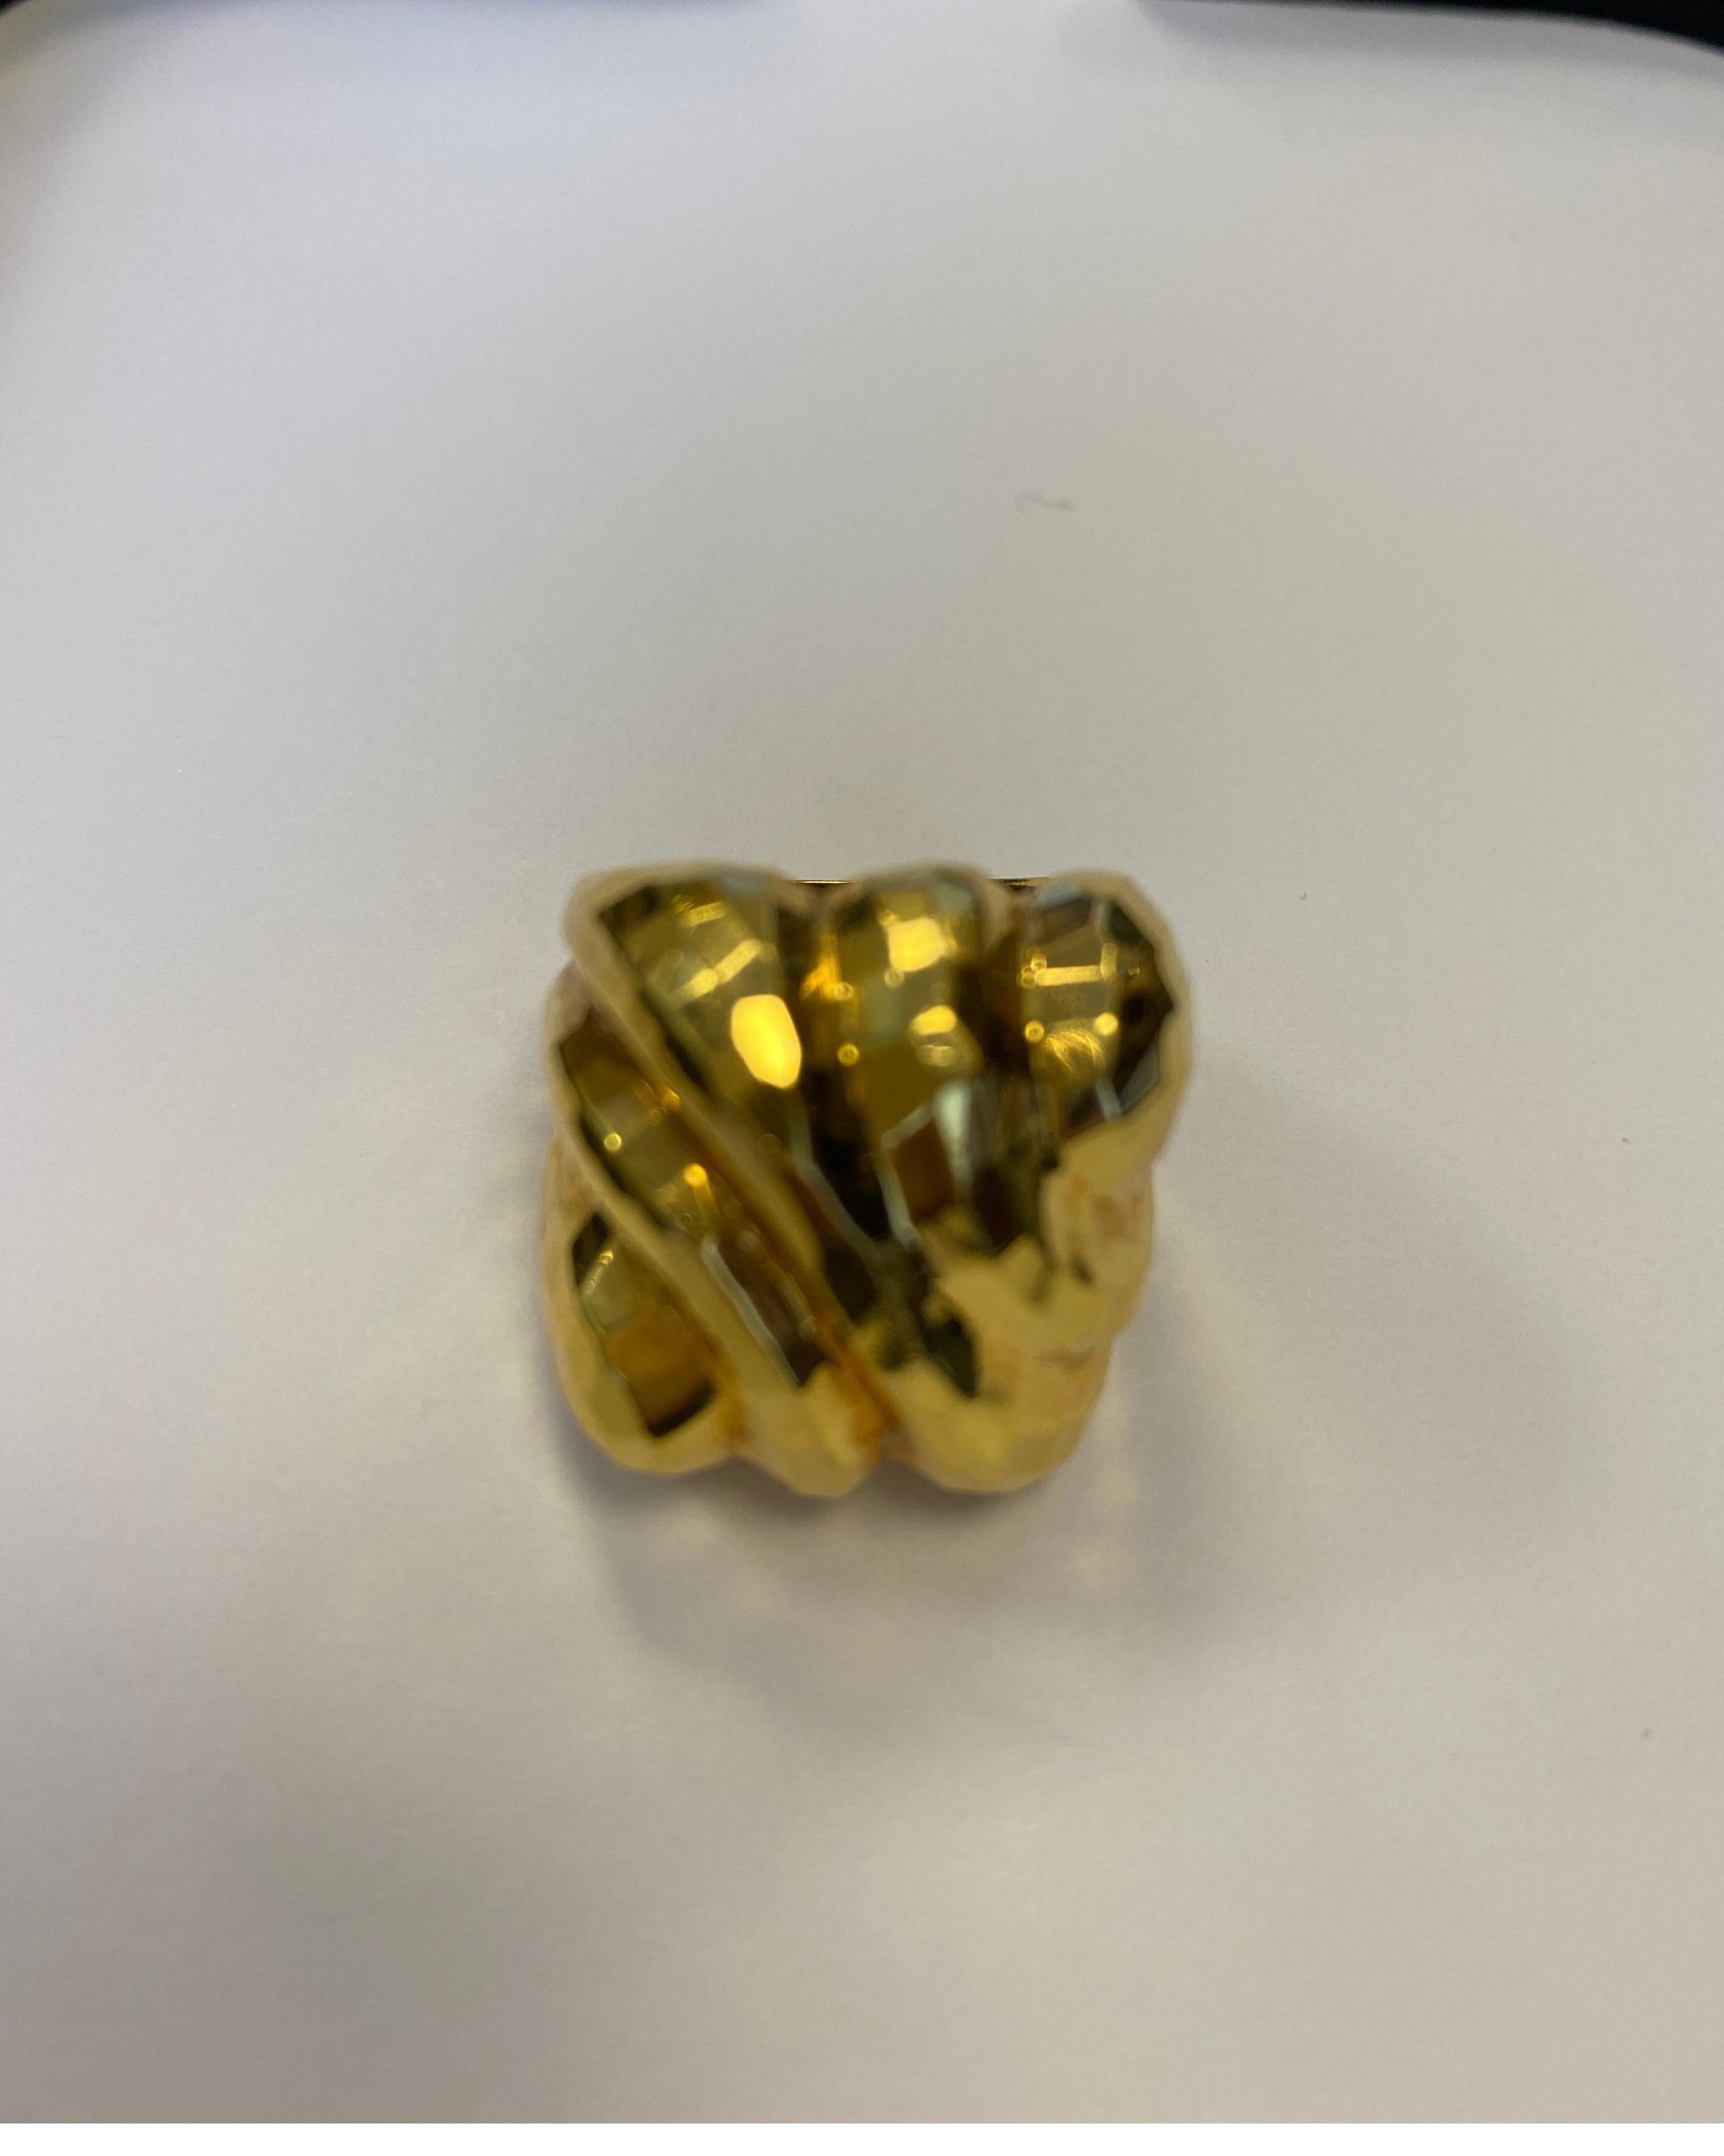 18K yellow gold, faceted design, contemporary ring, finger size 6.75 , may be sized.
last retail $3500